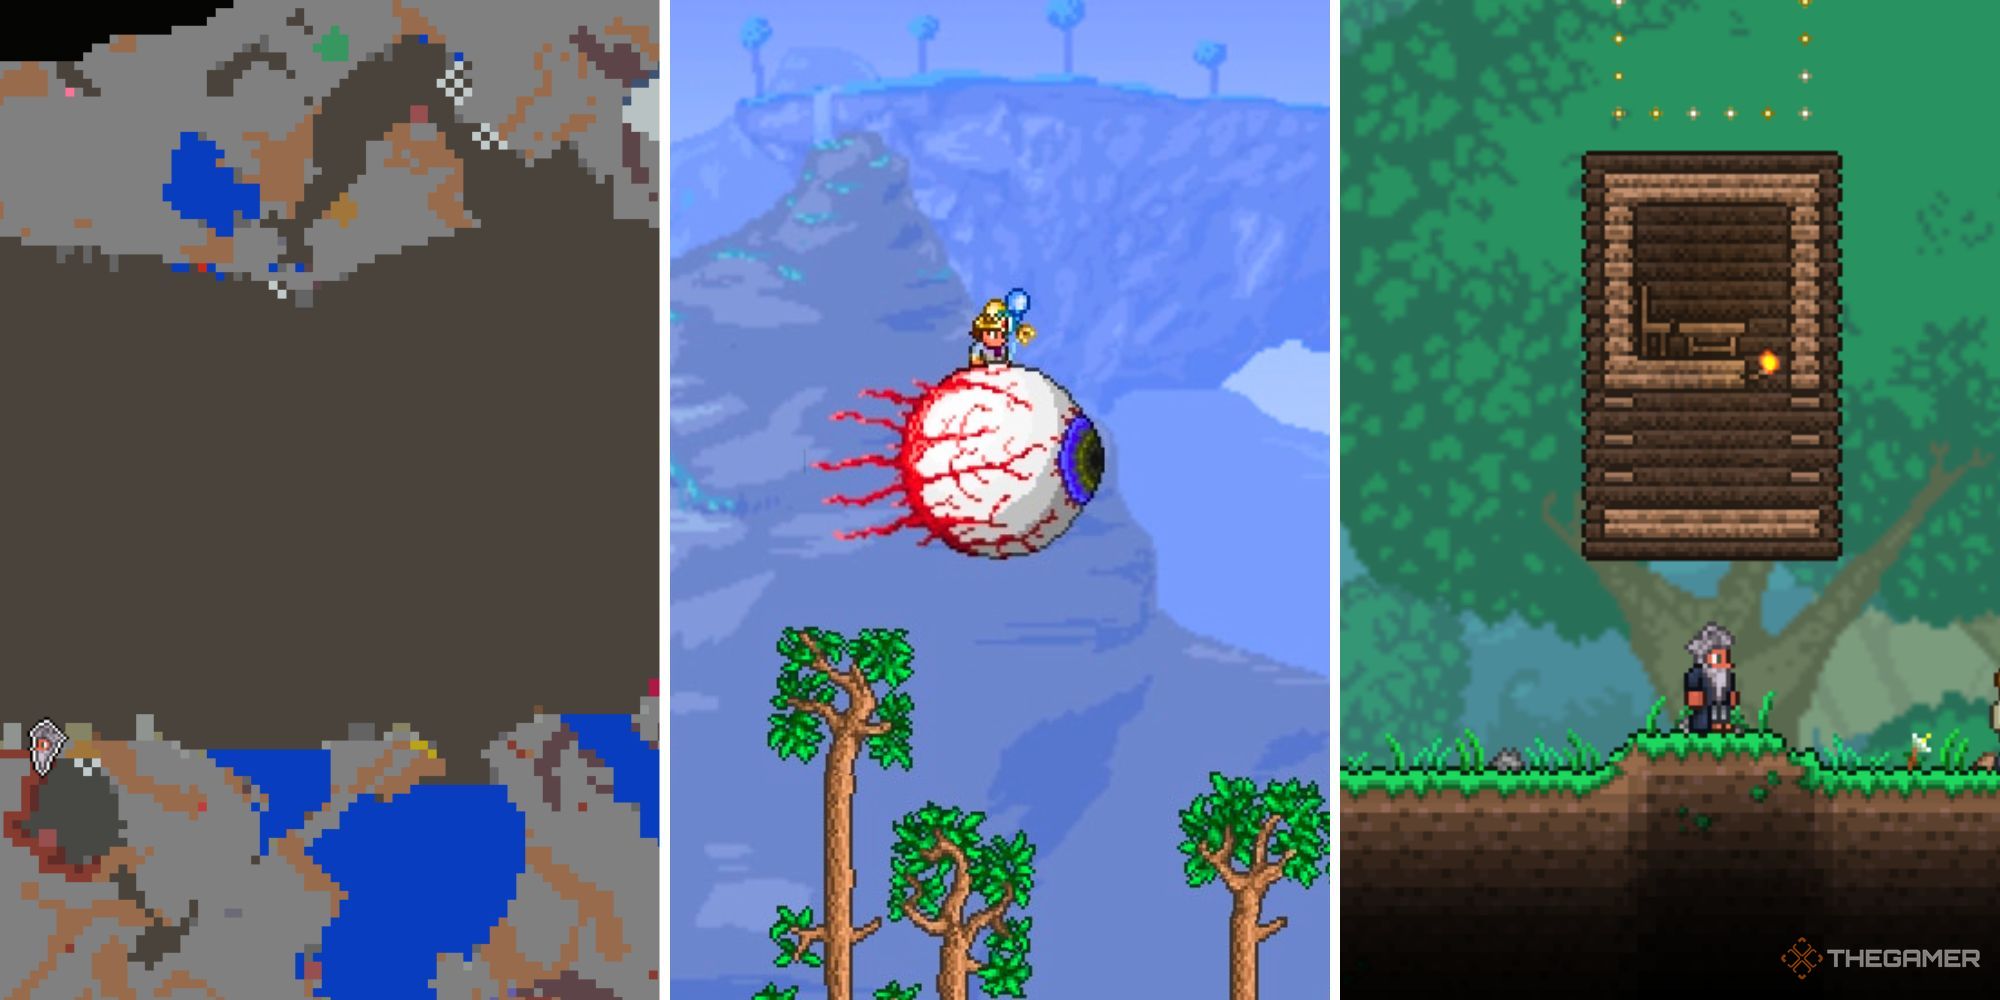 A split image of a horizontal, underground cavern, a player riding a pacified Eye of Cthulhu, and a player standing under a compact, wooden house.